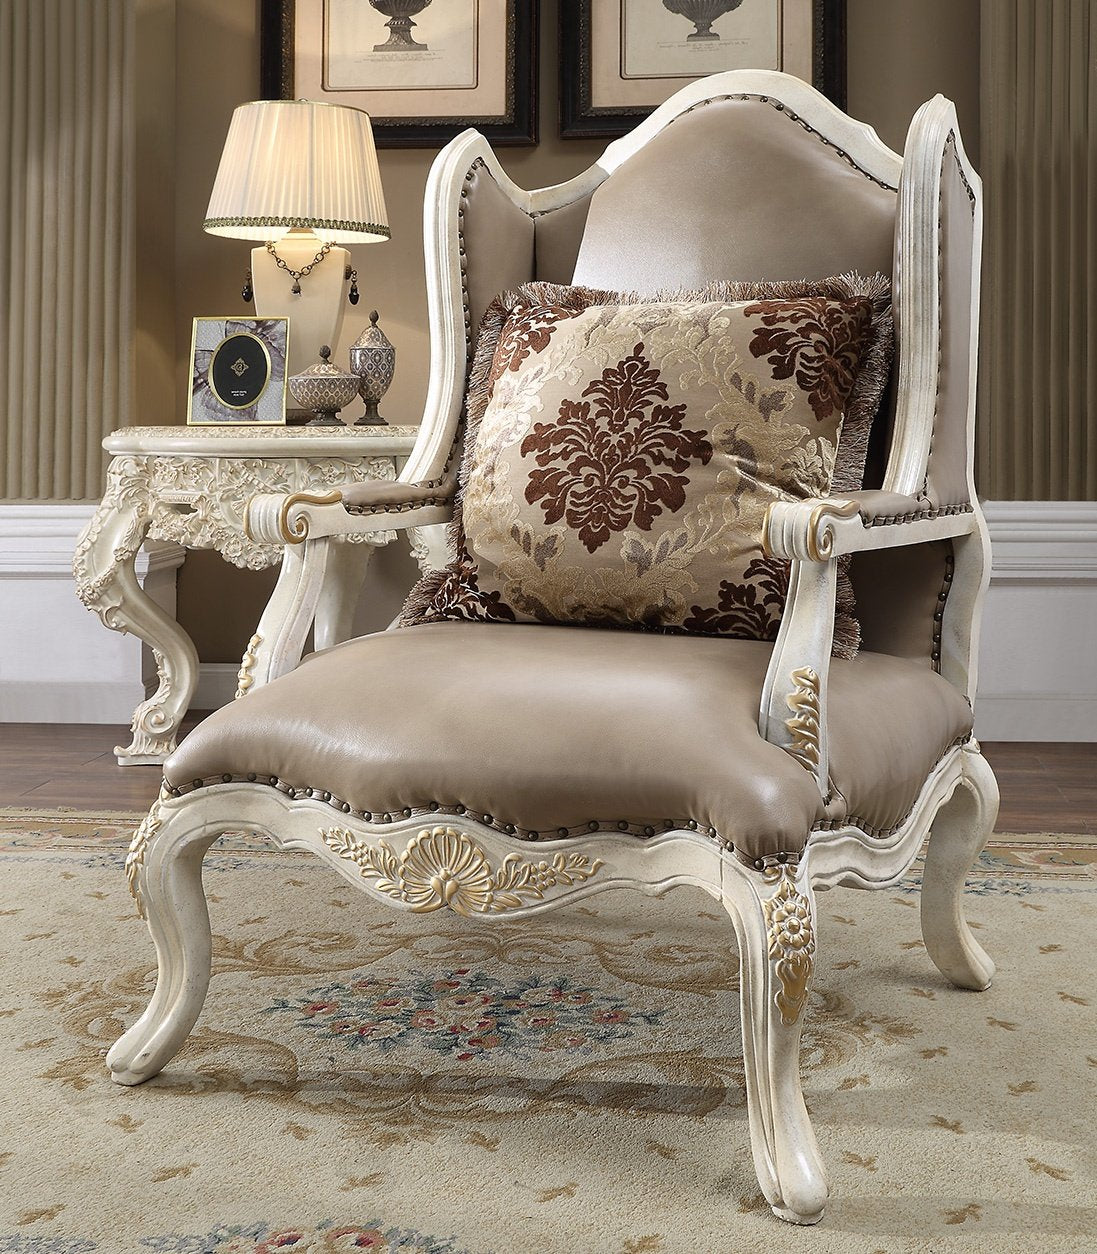 Leather Chair in Cove White & Metallic Bright Gold Accent Finish C90 European